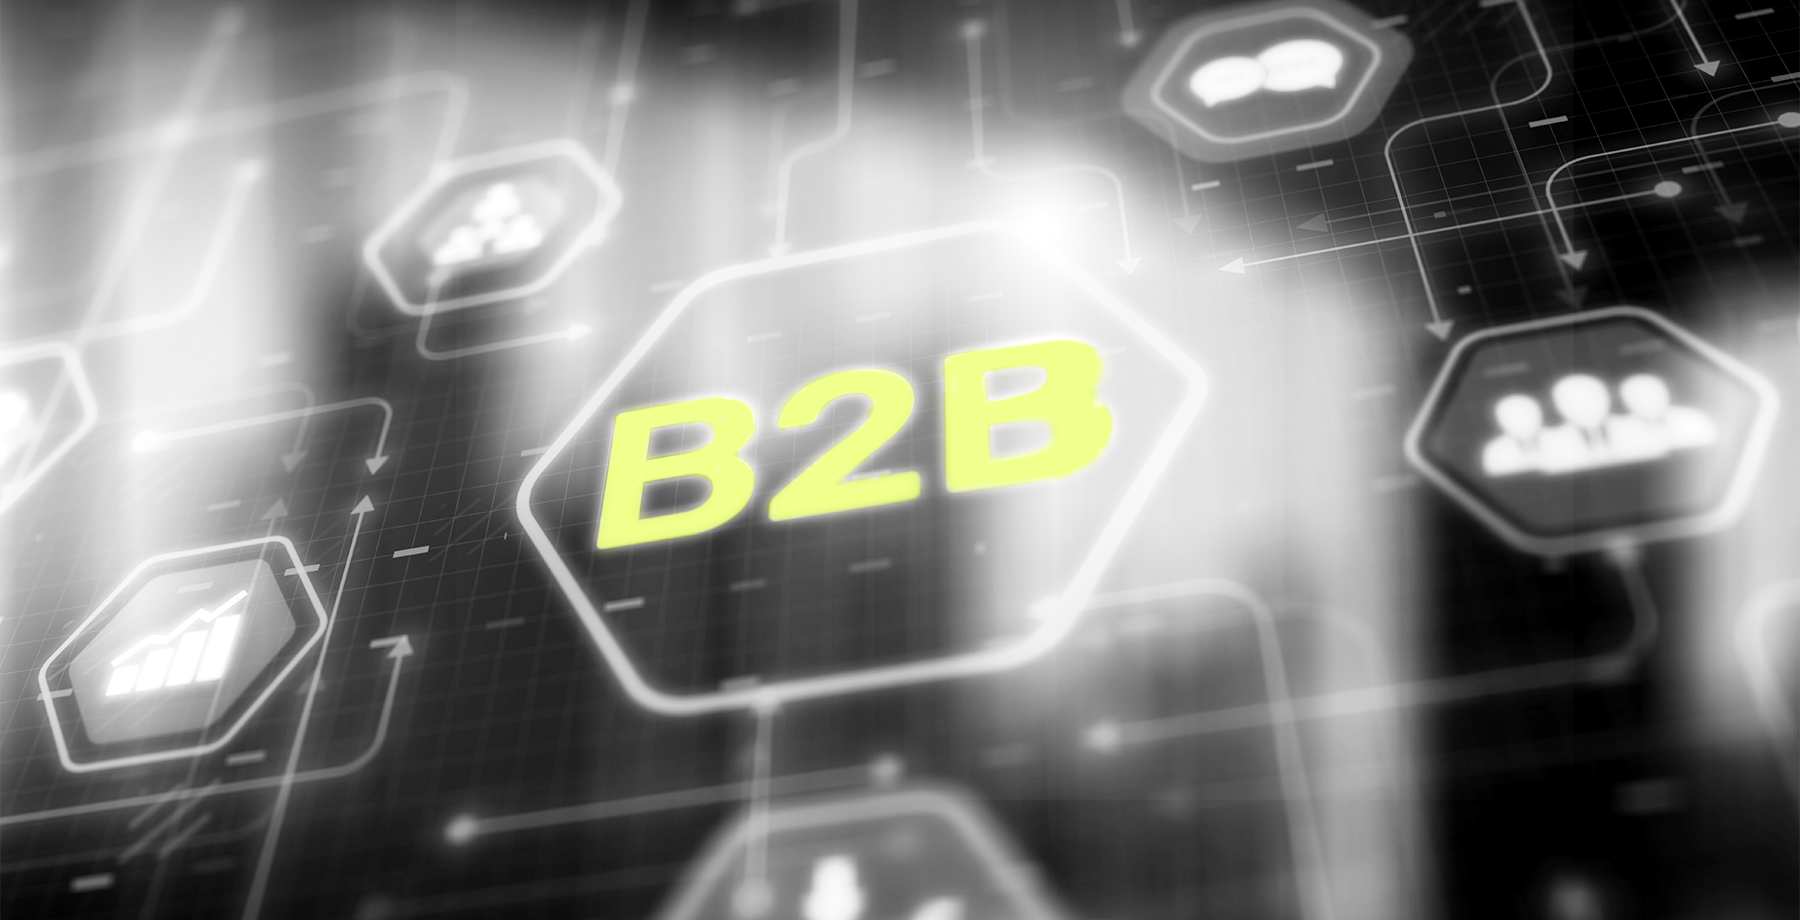 The Demand for Better B2B Experiences is Here